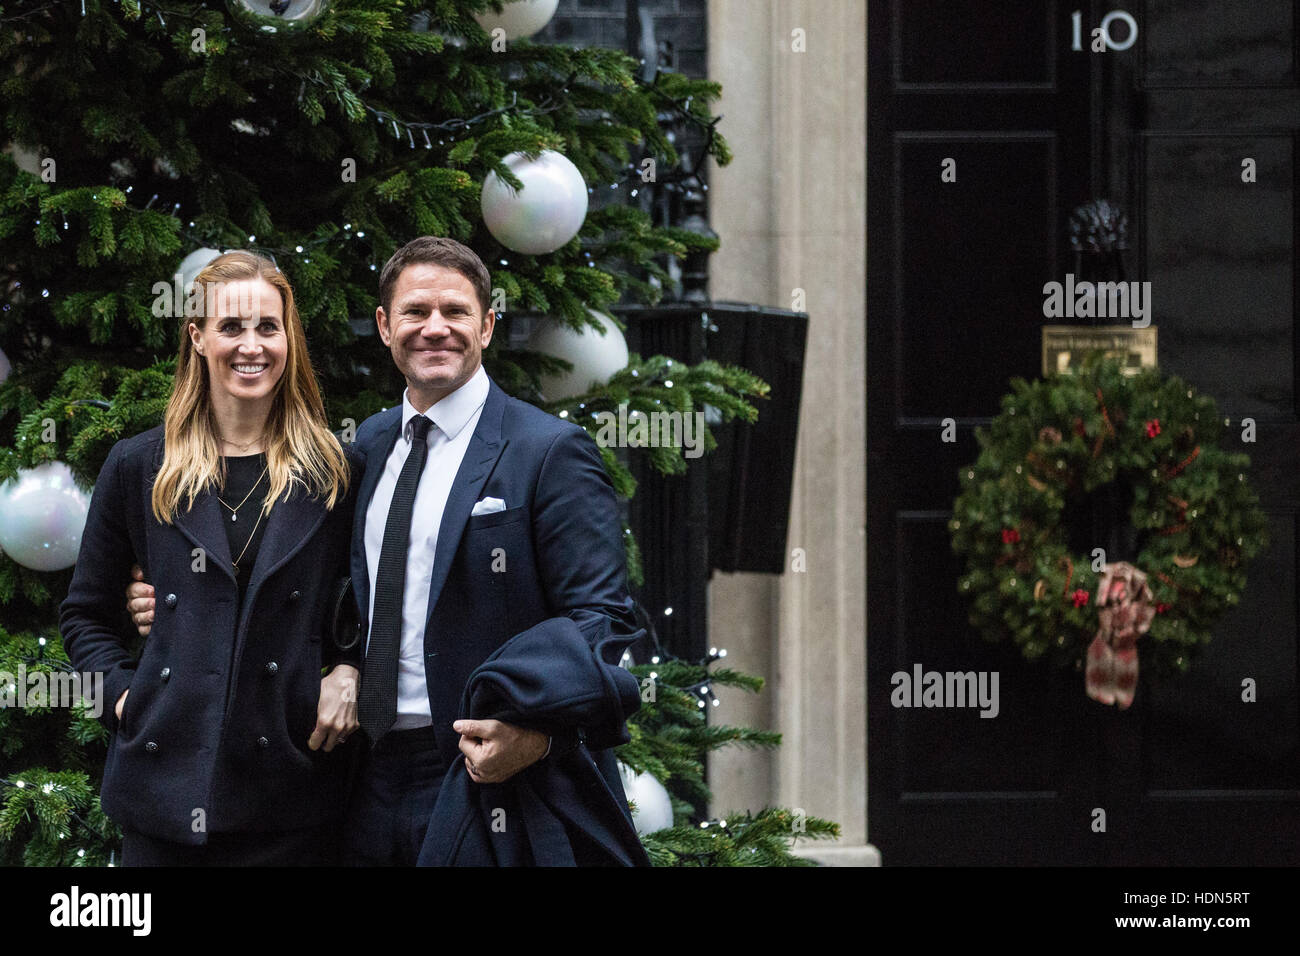 London, UK. 13th December, 2016. Helen Glover and Steve Backshall pose in front of the Downing Street Christmas tree before the Children's Christmas Party at No. 11 hosted by Chancellor of the Exchequer Philip Hammond in aid of the Starlight Children's Foundation. Credit:  Mark Kerrison/Alamy Live News Stock Photo